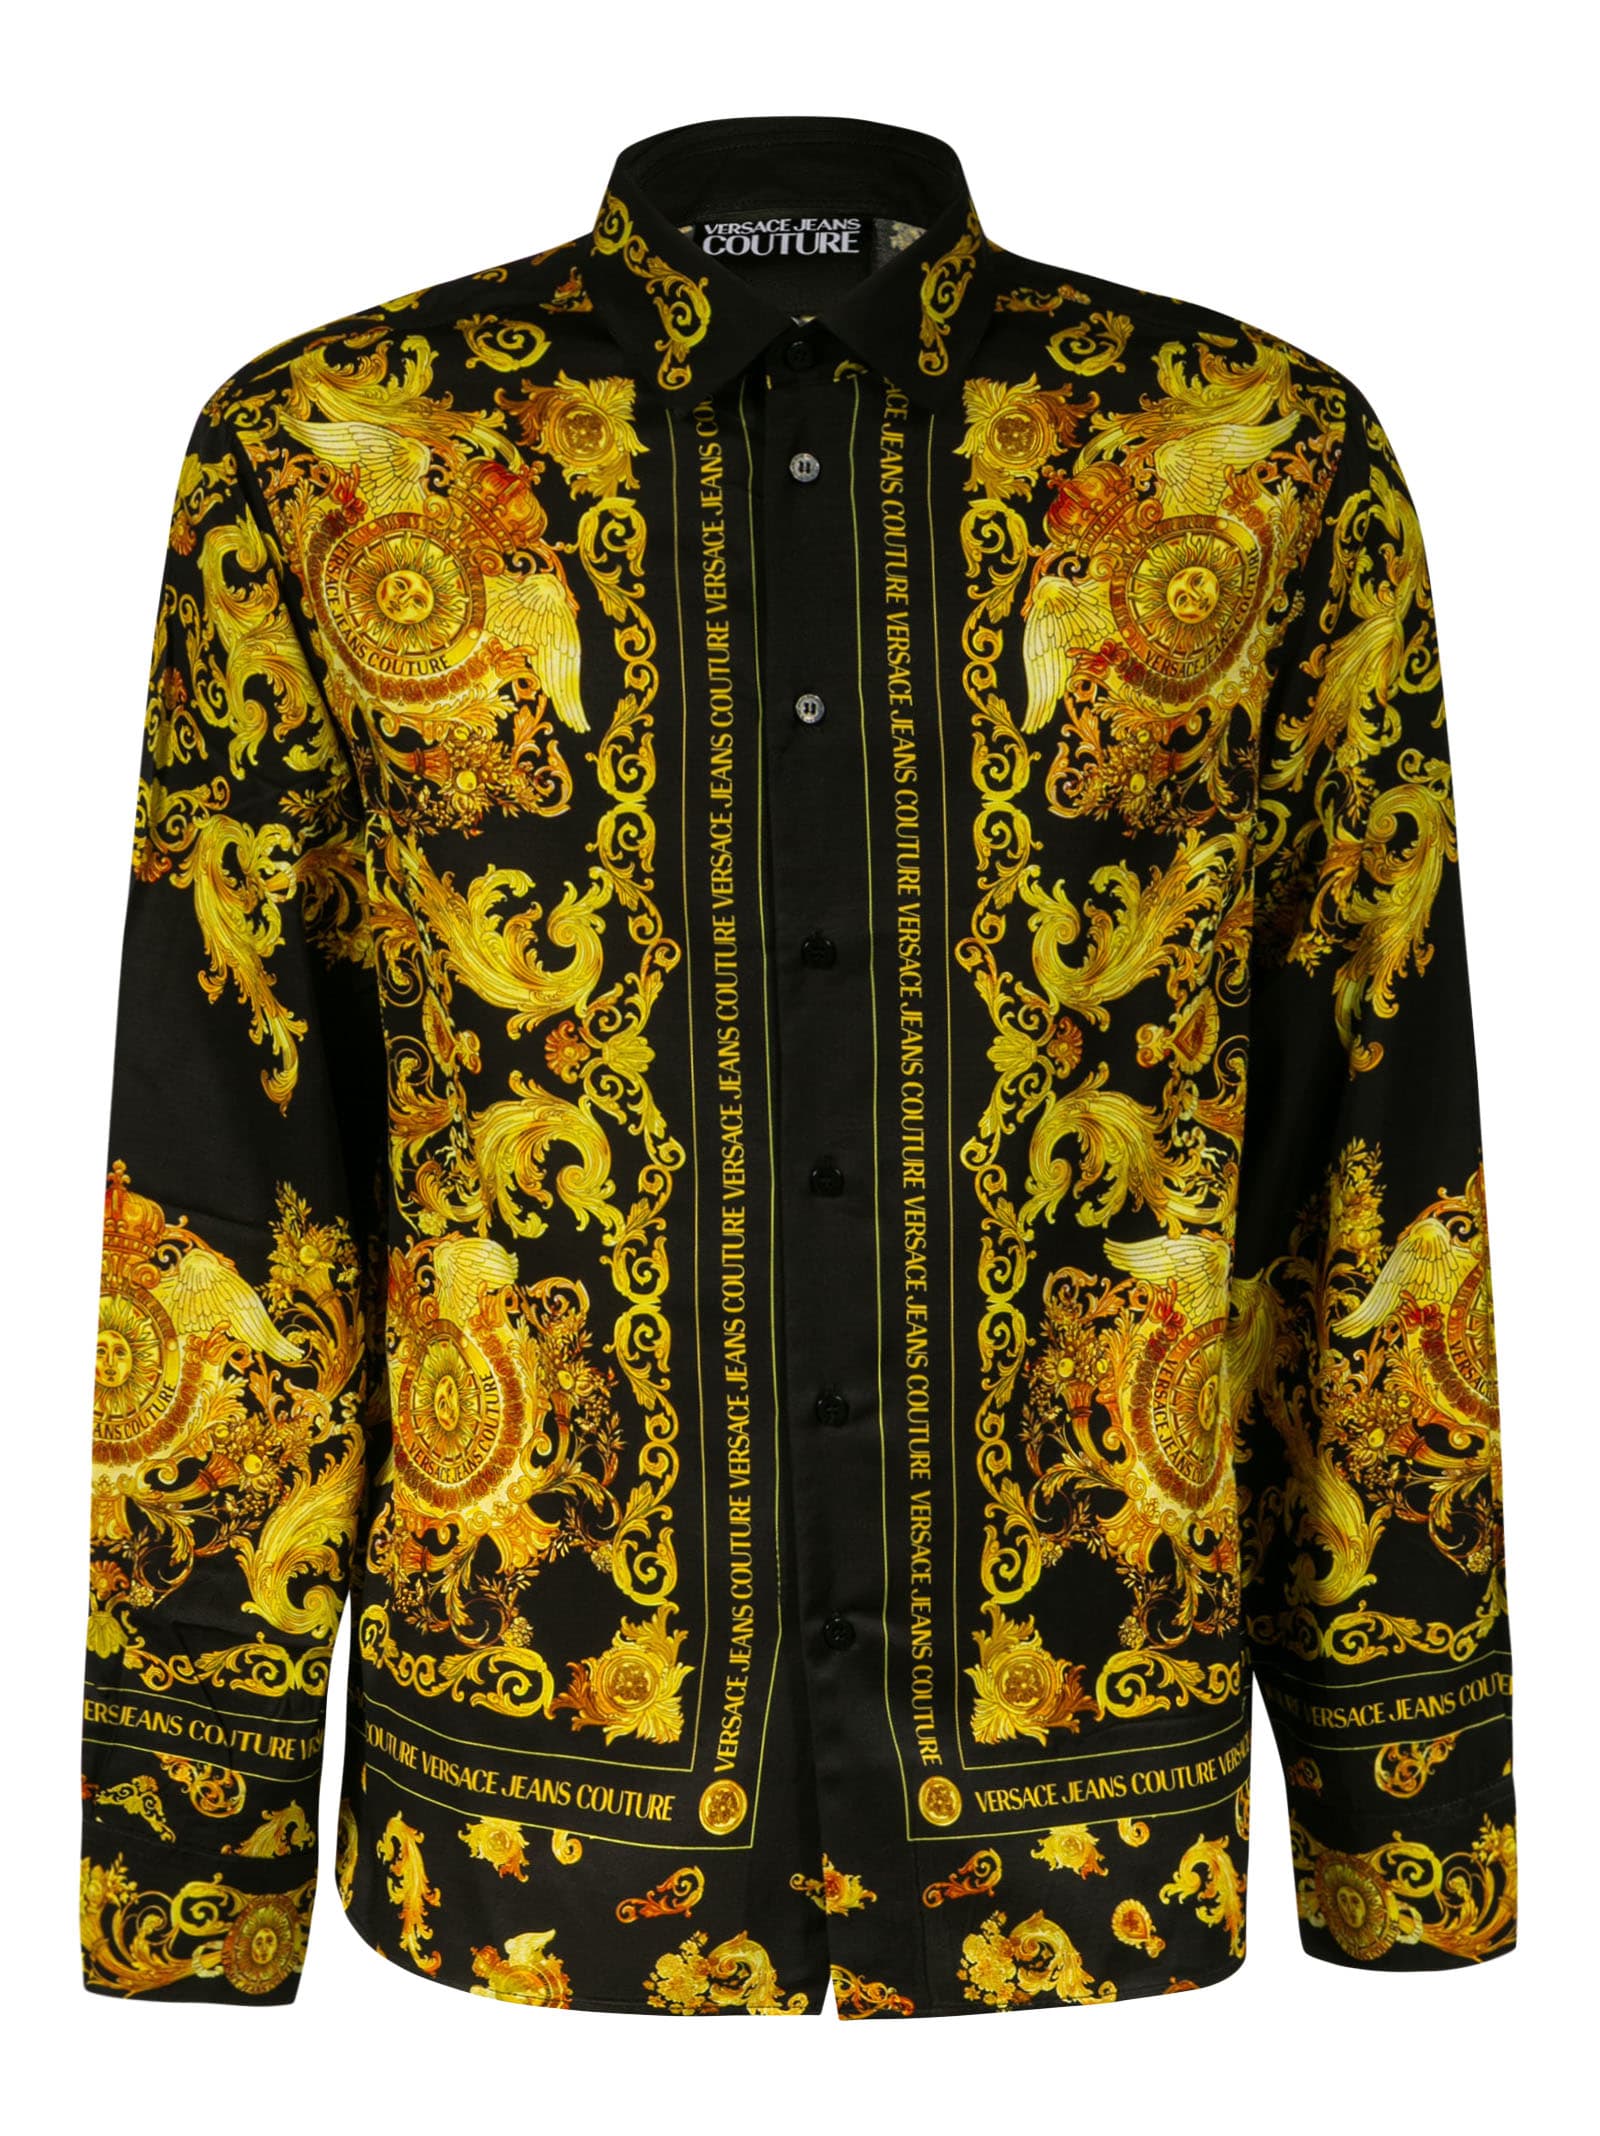 VERSACE JEANS COUTURE PRINTED SHIRT,B1.GWA6R3.S0273-899